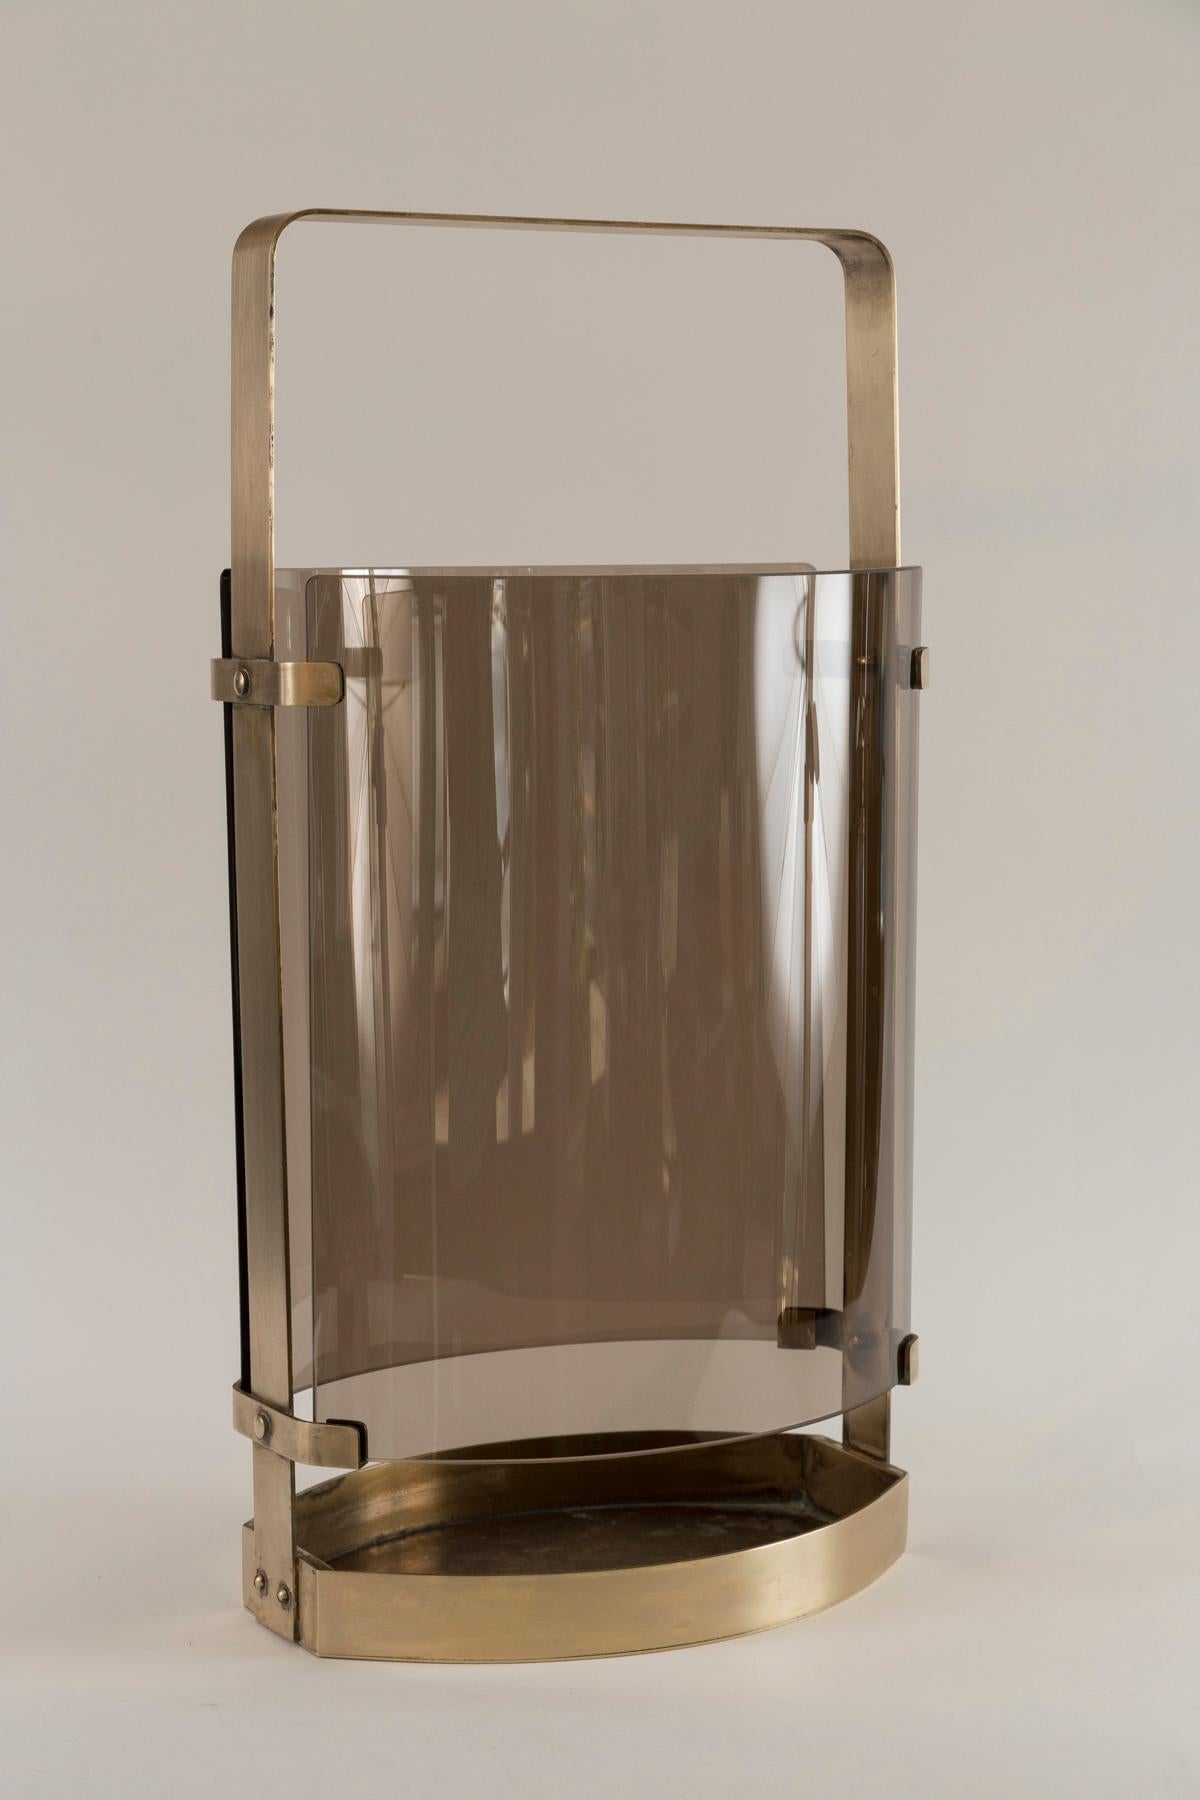 A beautiful sleek and curved umbrella stand in a thick unlacquered brass with curved smokey glass from  Fontana Arte, model 2035

Reference: Lights and Transparencies: Fontana Arte 1930-1950

Origin: Italy

Condition: Excellent including no